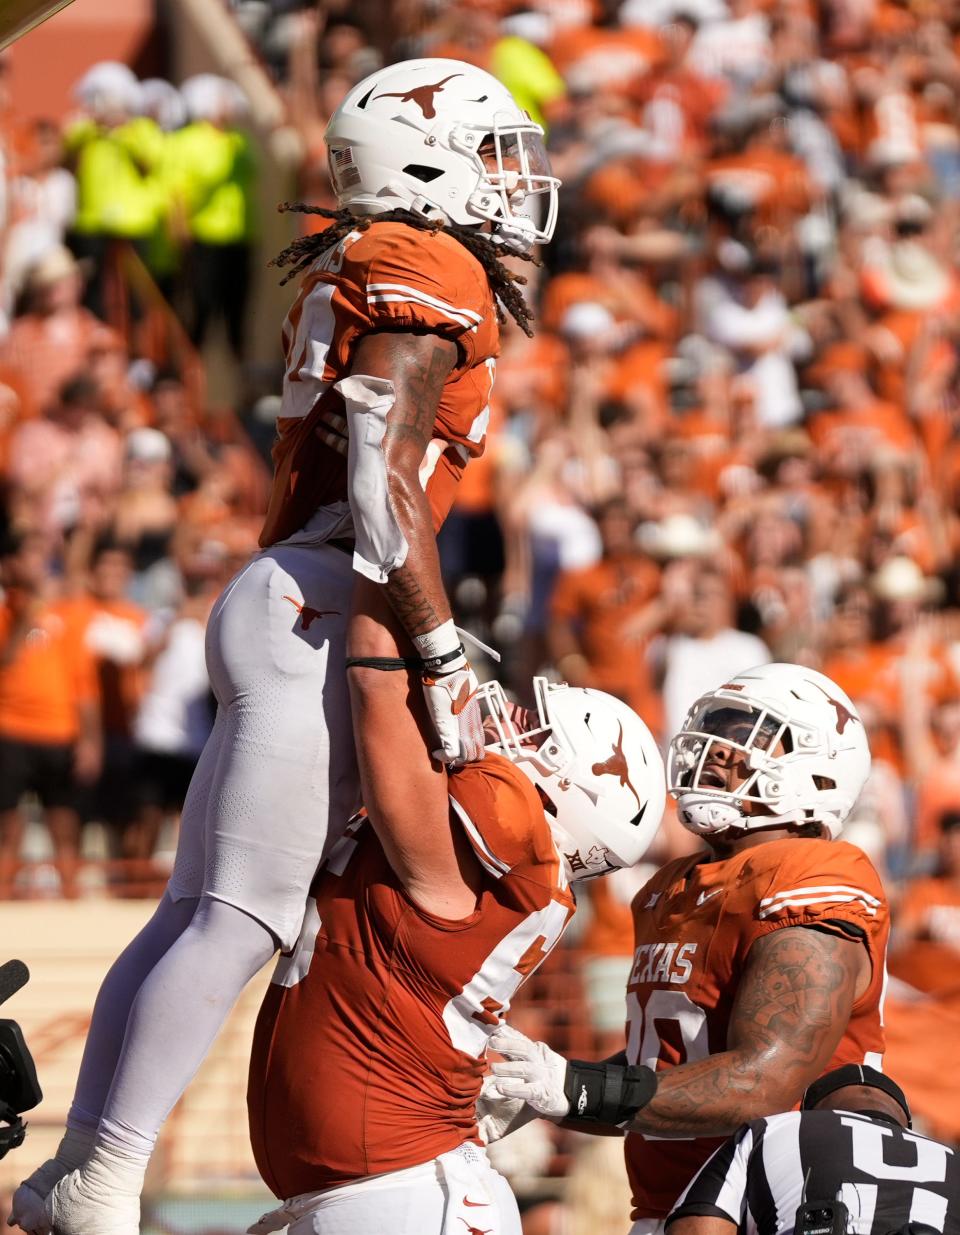 Texas running back Jonathon Brooks gets a lift after a third-quarter touchdown Saturday against Kansas. Brooks had 20 carries for 217 yards and two scores.